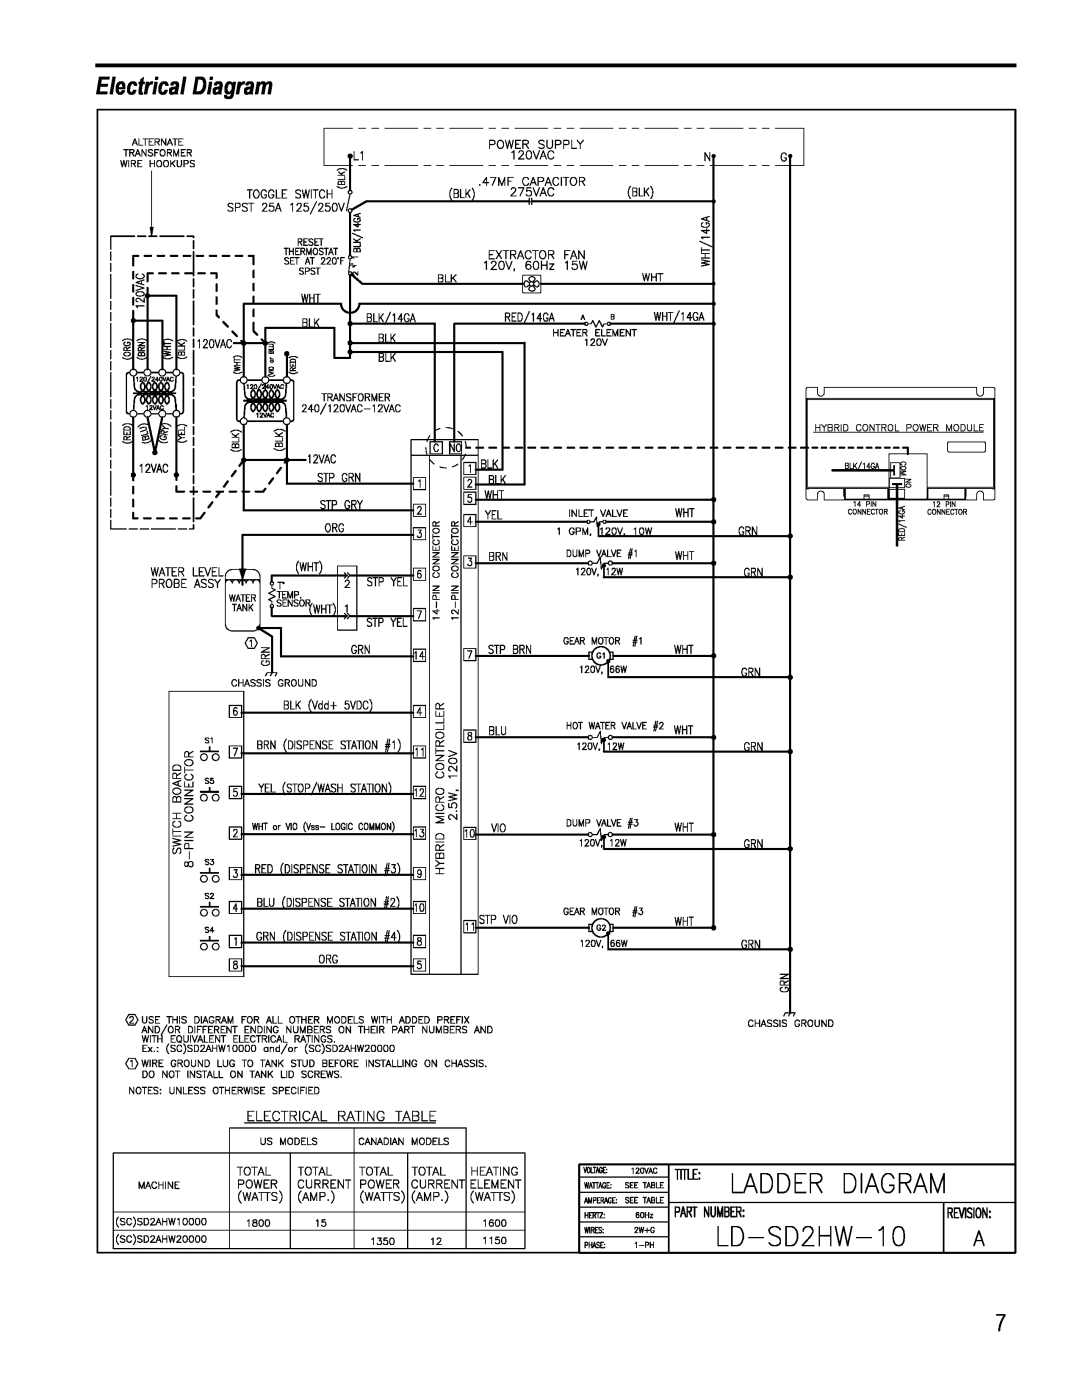 Wibur Curtis Company SD2 specifications Electrical Diagram 